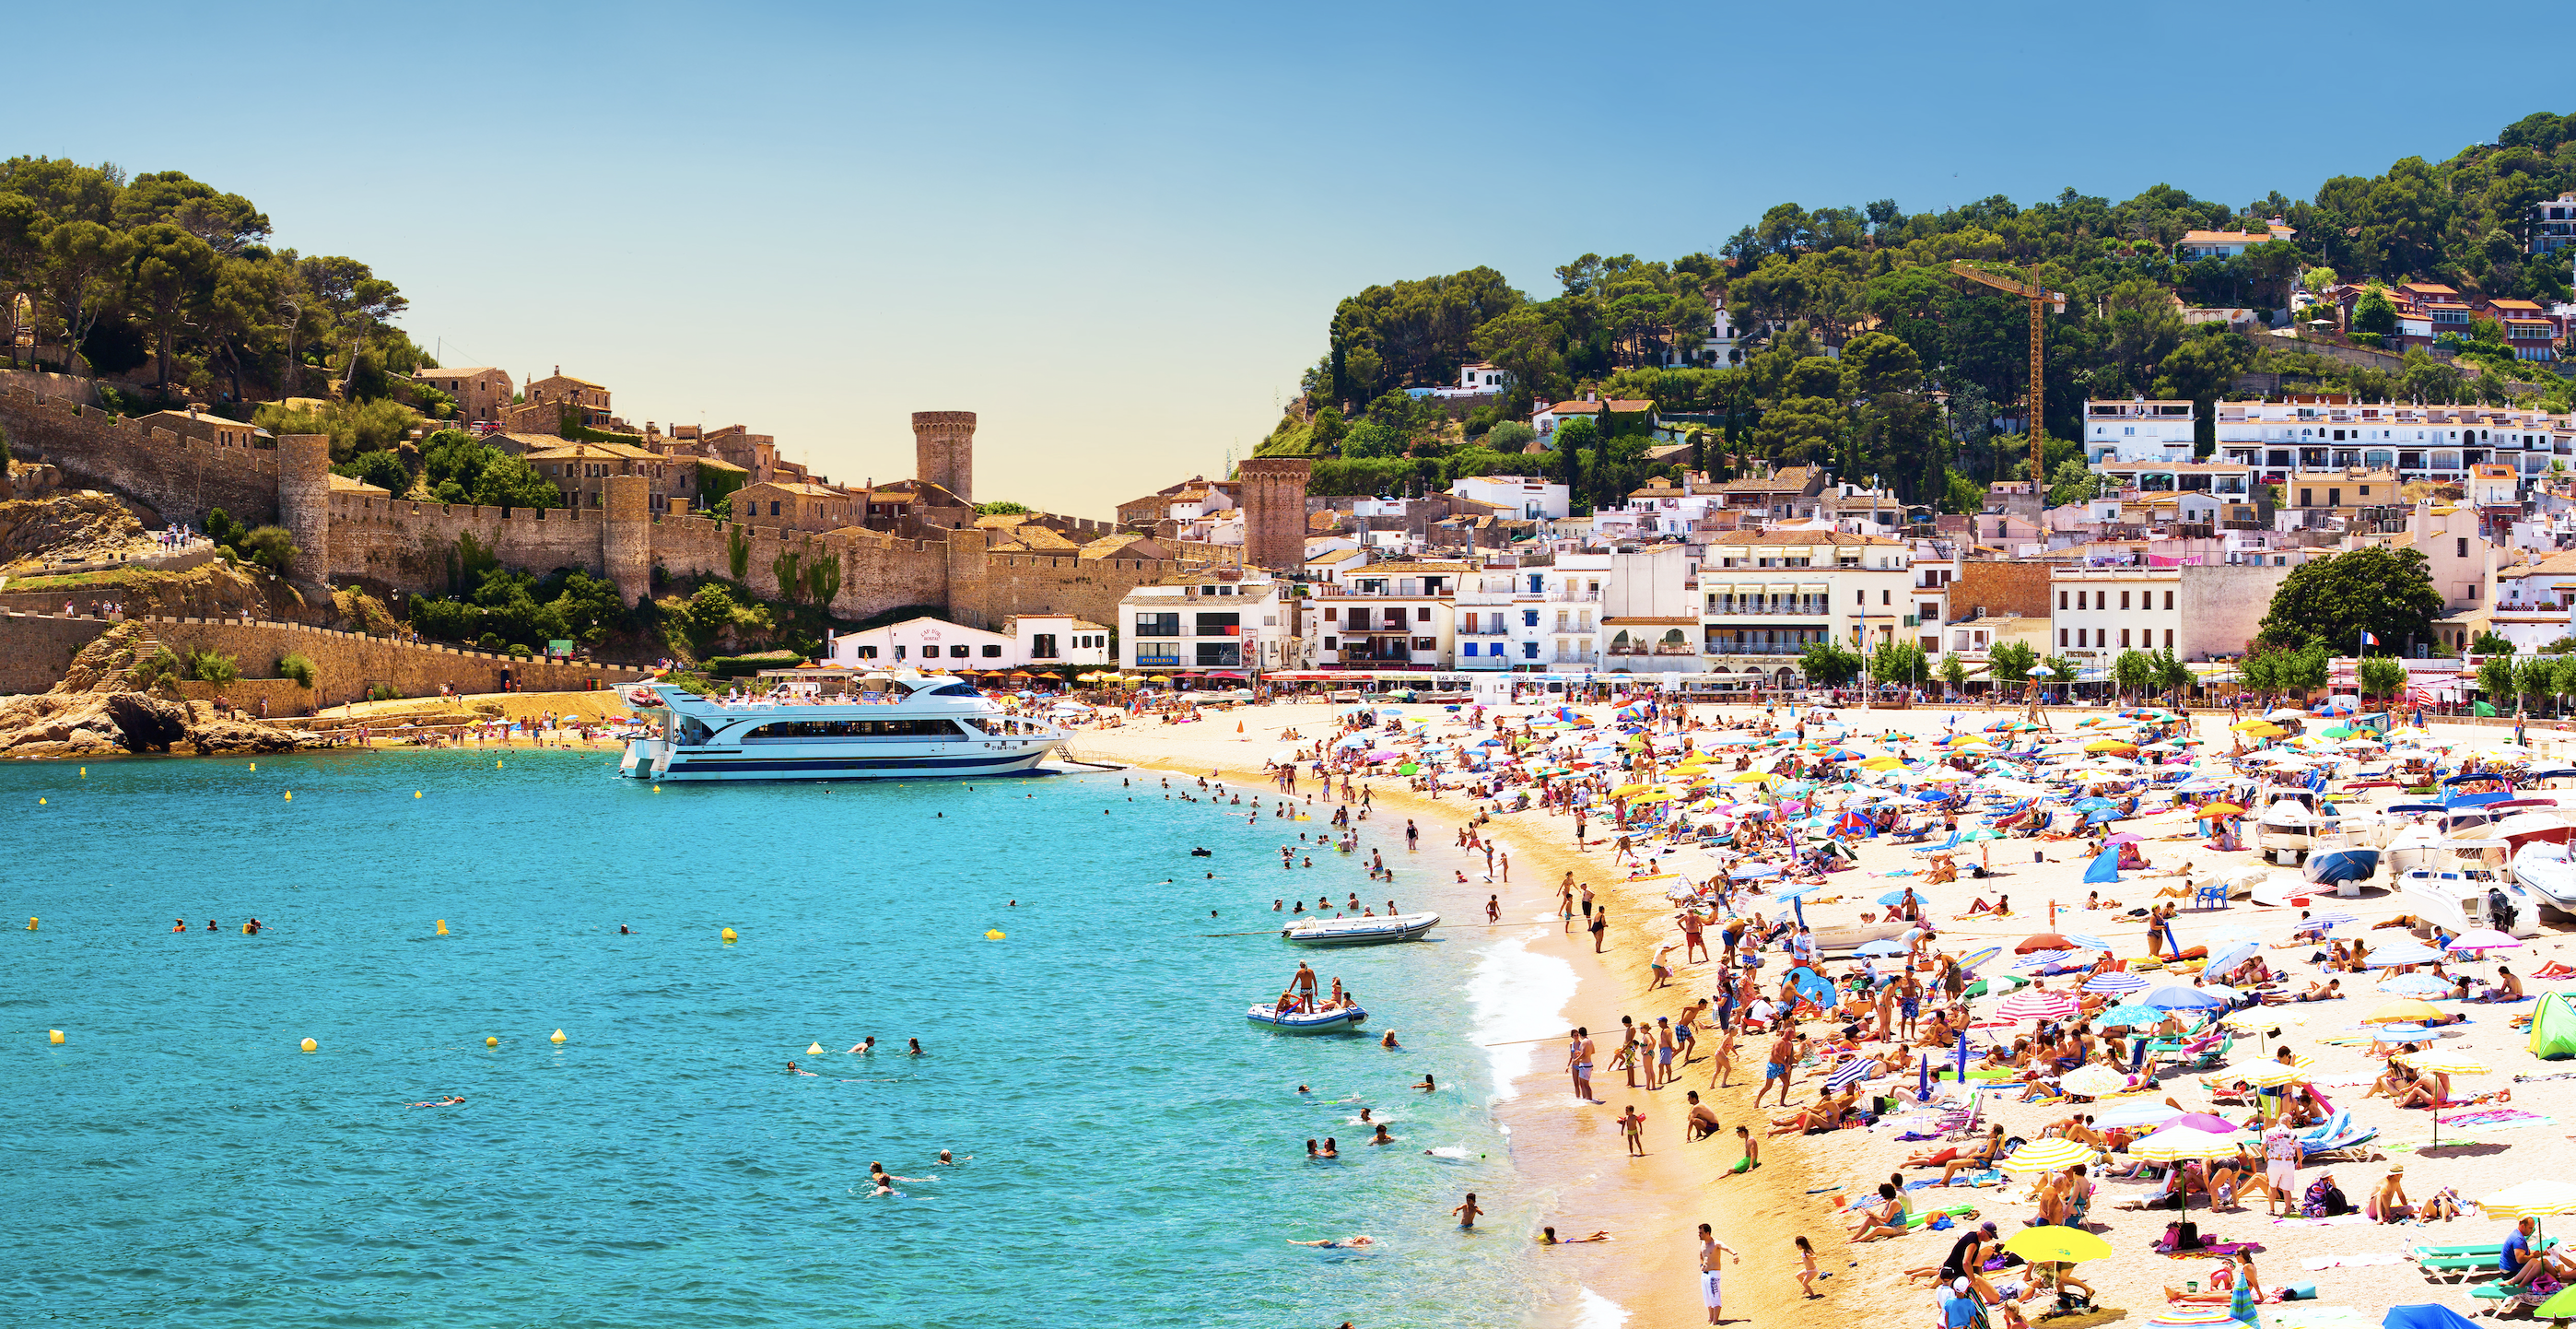 Coast with tanning and bathing people (Panorama of Costa Brava, Tossa de Mar city, Spain). Image by Denis Mironov/Shutterstock. Spain, undated. 